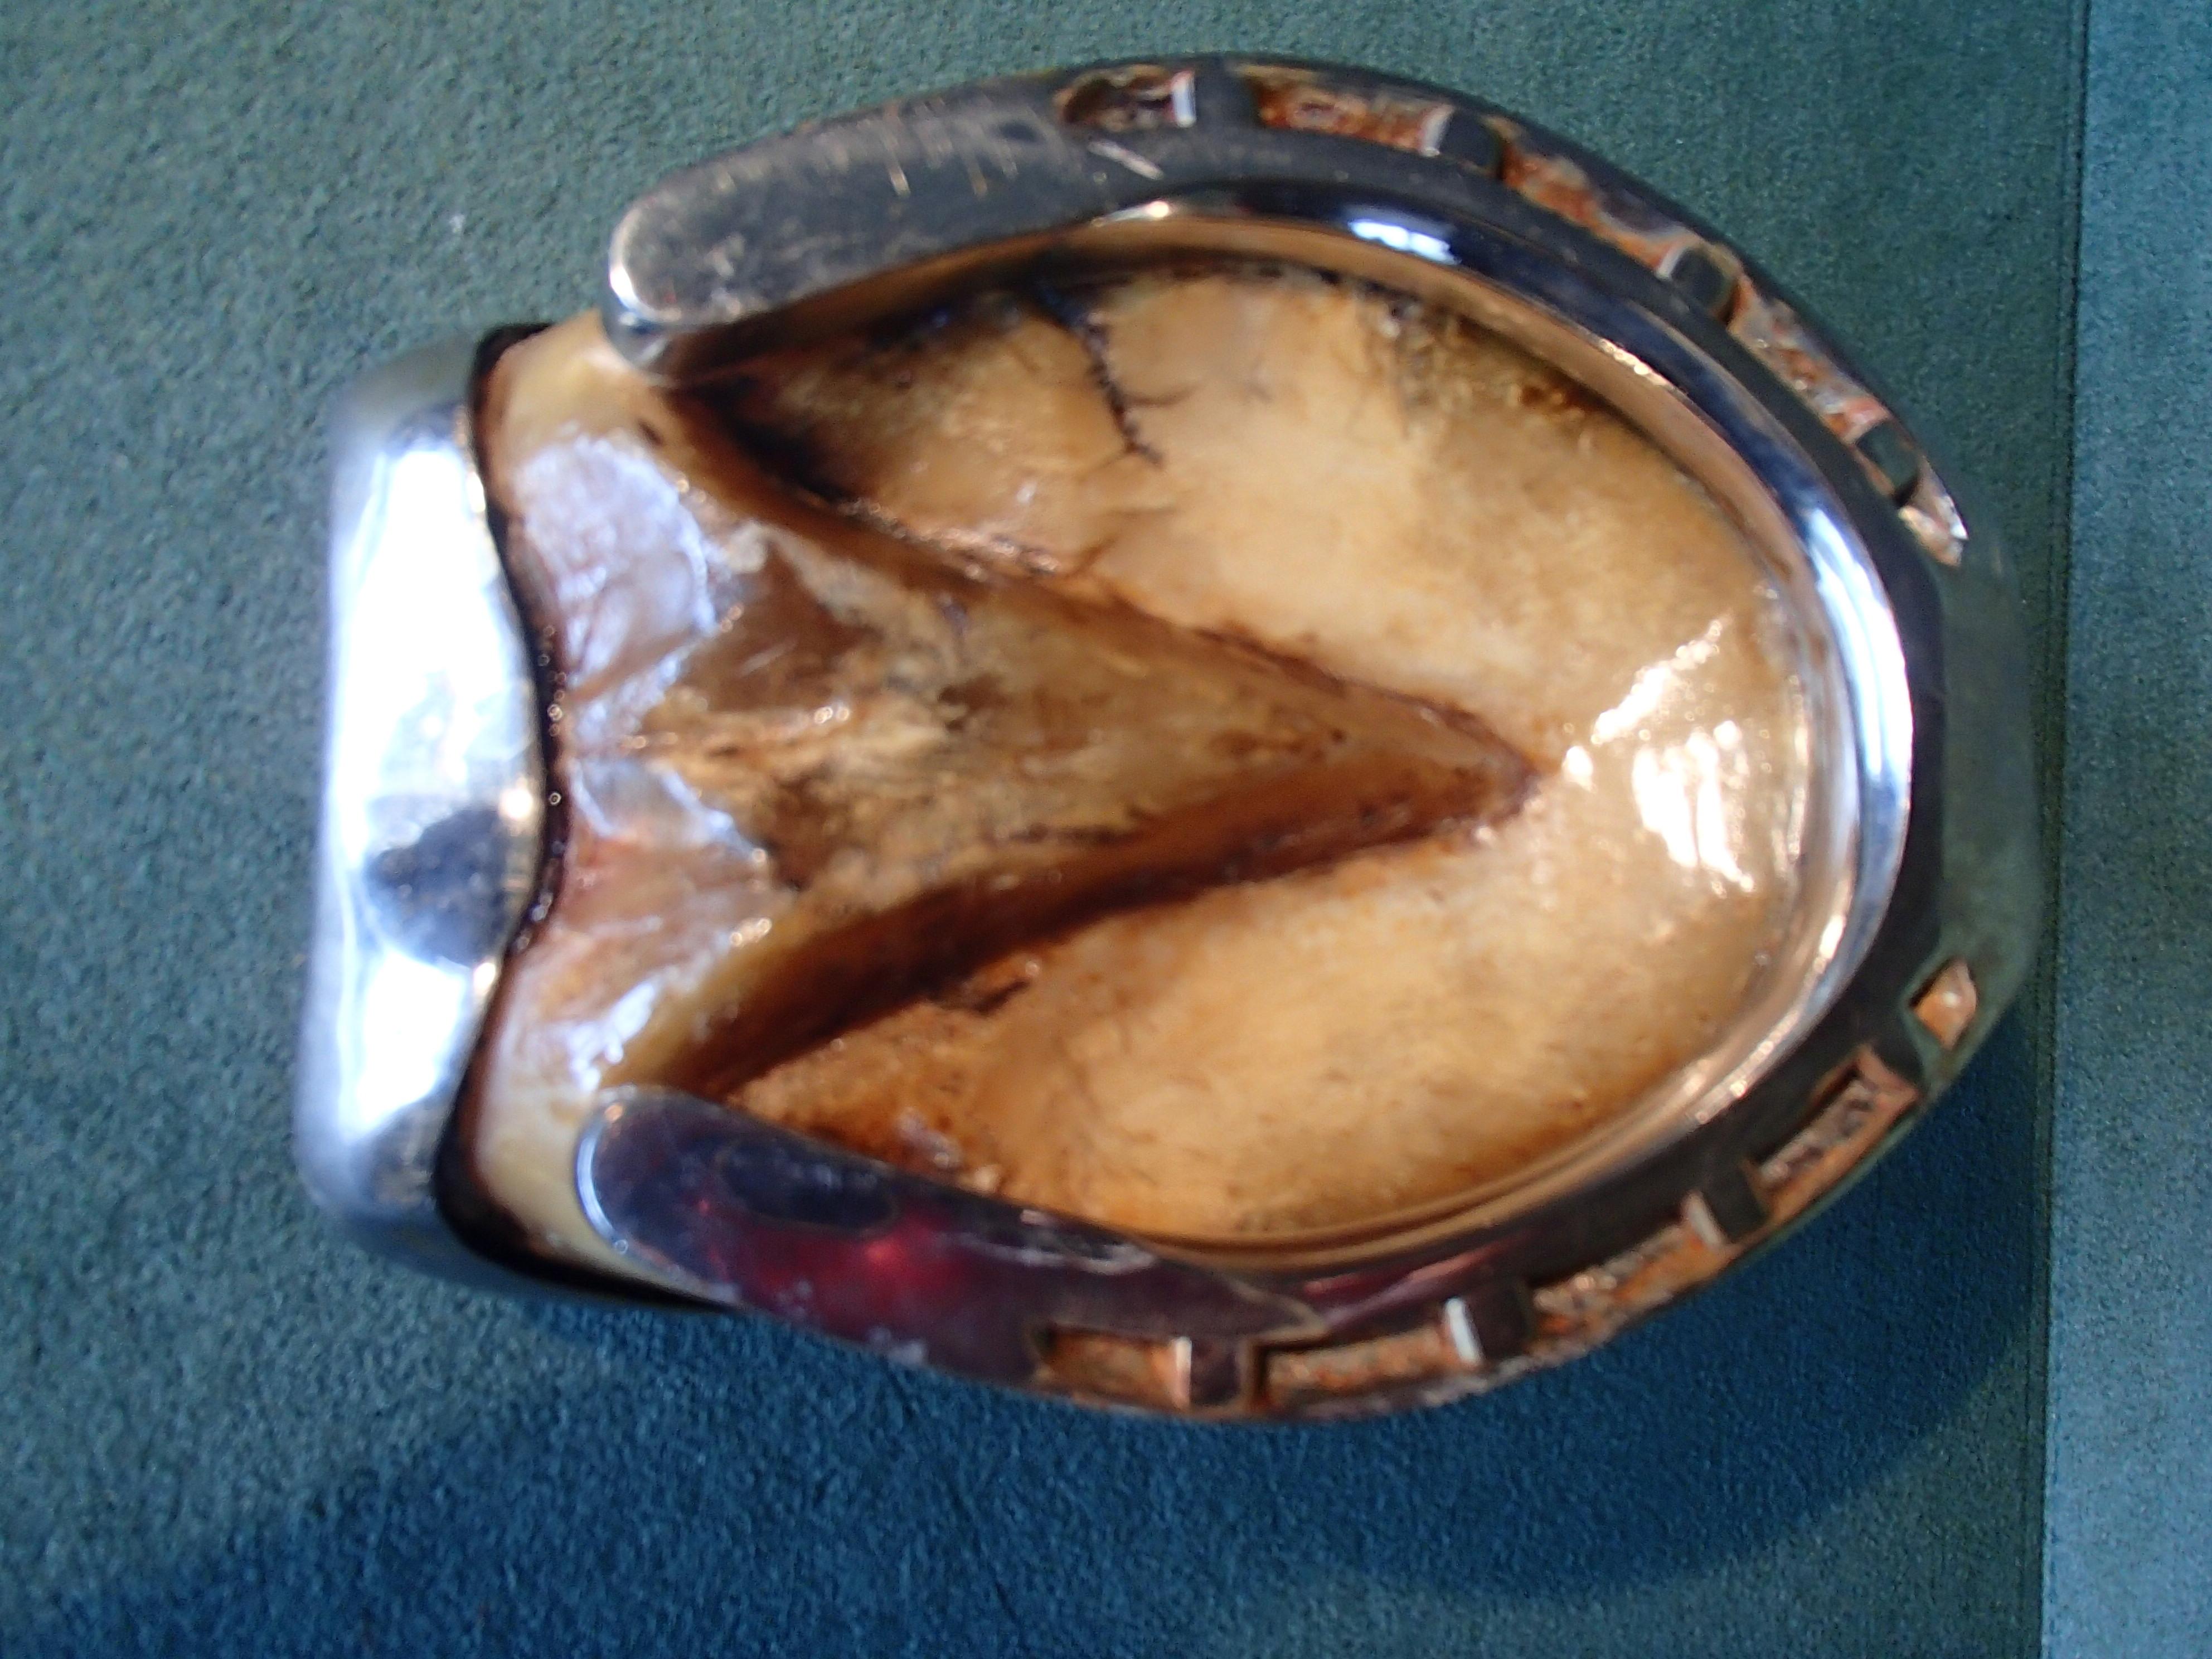 European Modern Ashtray Made of a Real Horse Foot with Metal and For Sale